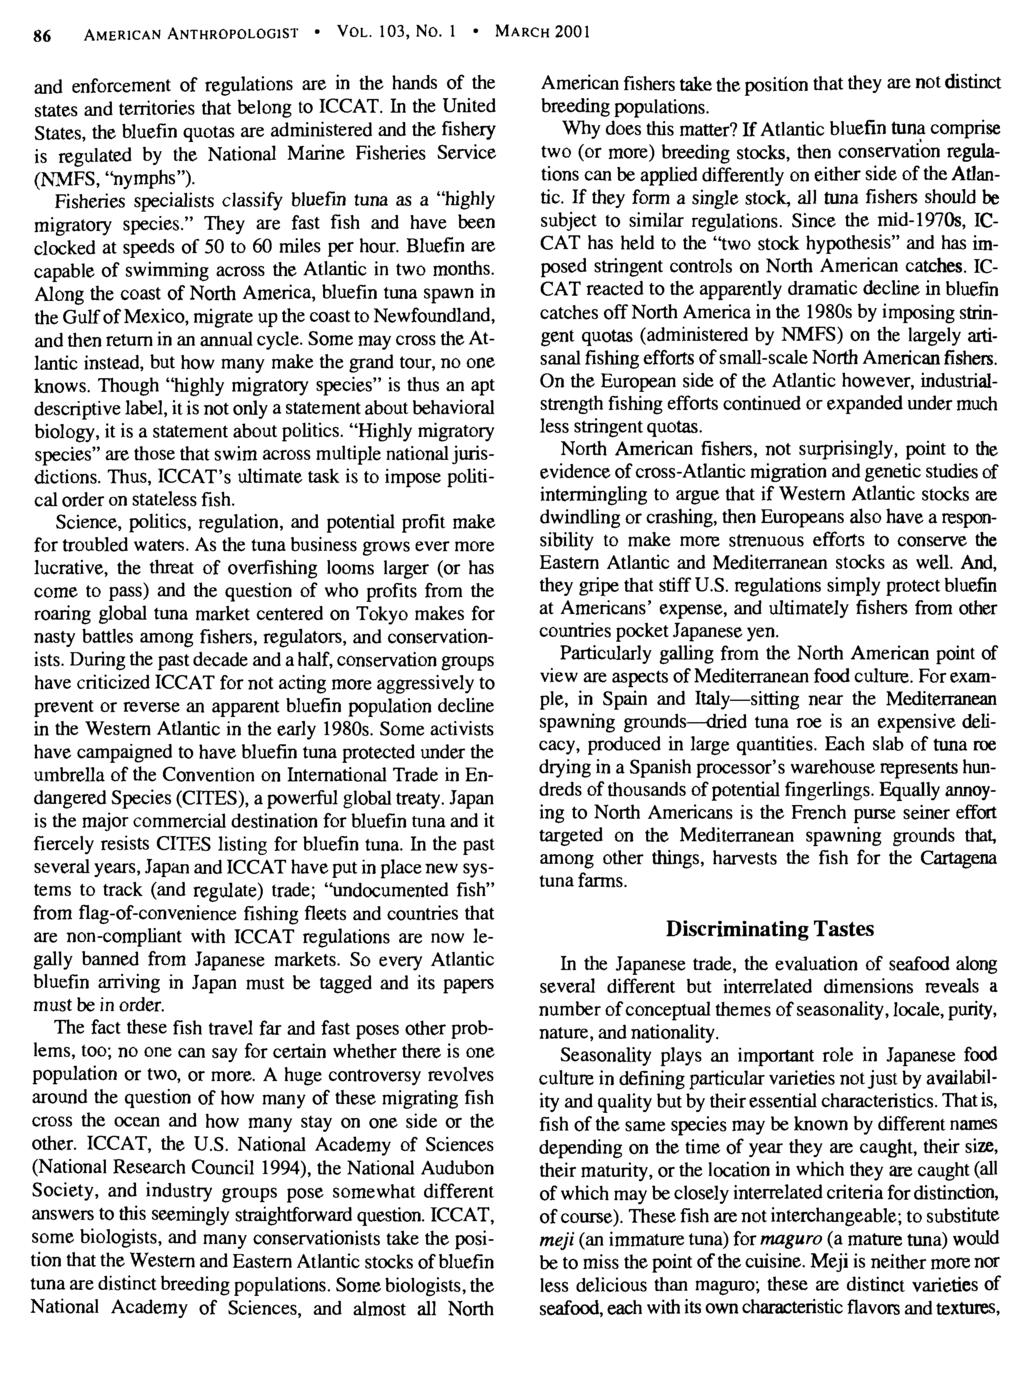 86 AMERICAN ANTHROPOLOGIST VOL. 103, No. 1 MARCH 2001 and enforcement of regulations are in the hands of the states and territories that belong to ICCAT.